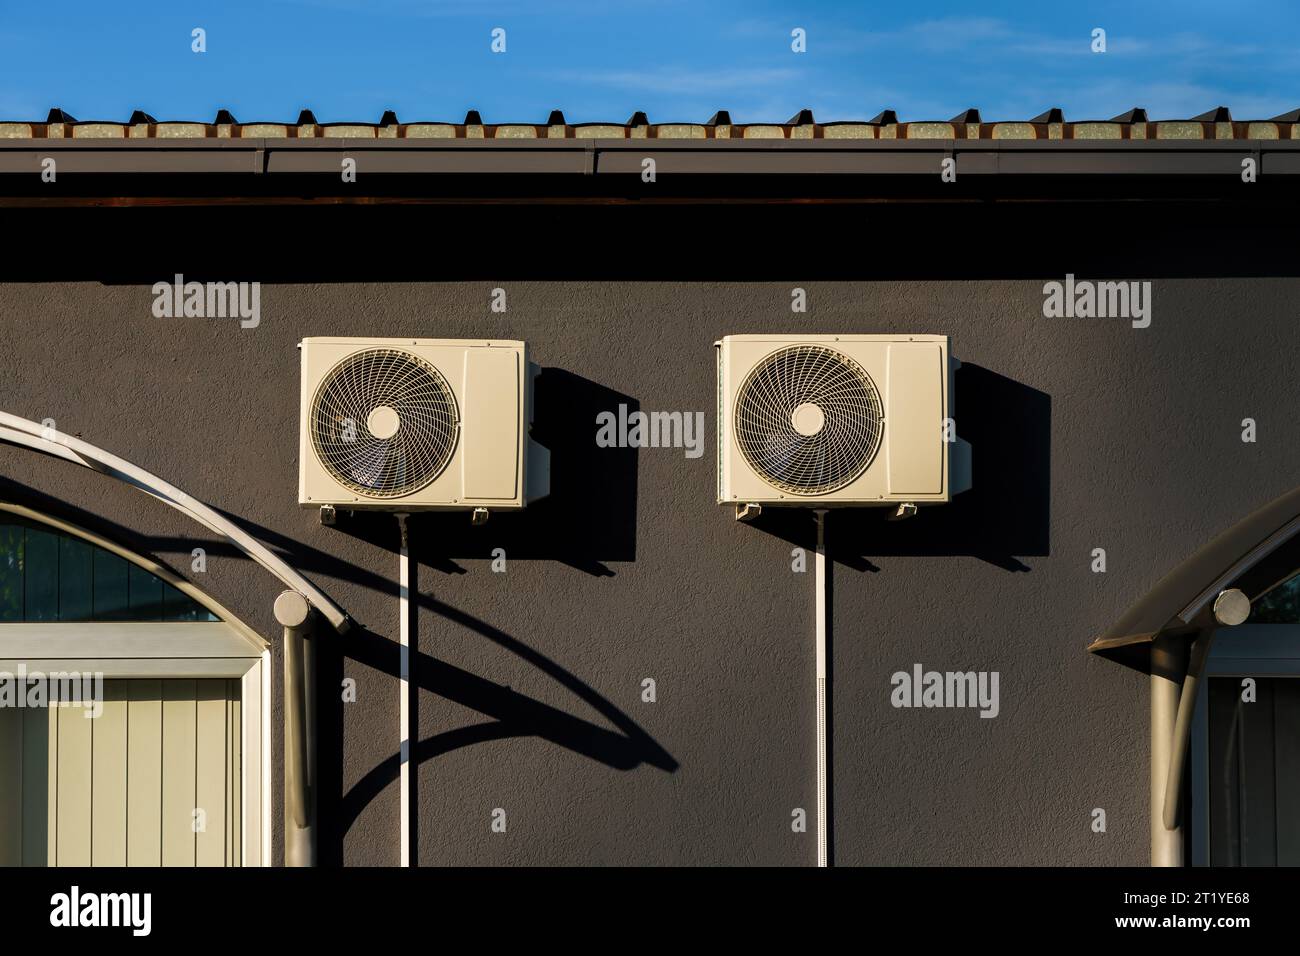 Air conditioner external units mounted on building wall. Heat pumps air to air equipment on facade. Stock Photo